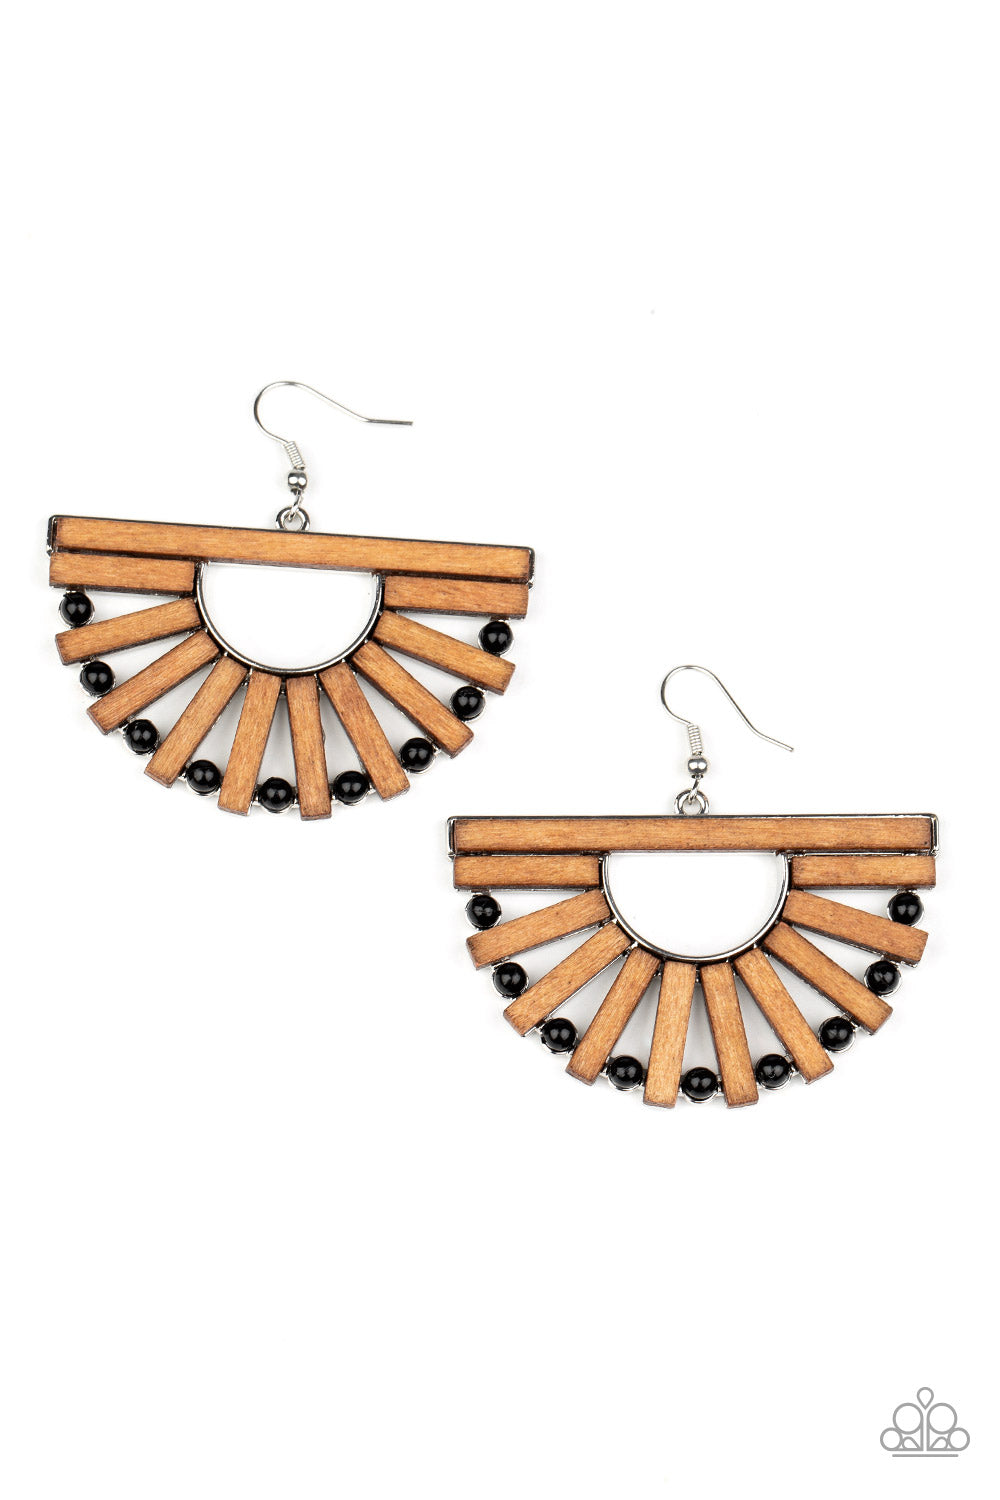 New Paparazzi Wooden Earrings - rectangular frames and dainty black beads alternate along an airy silver frame, coalescing into a radiant crescent for an earthy flair. Earring attaches to a standard fishhook fitting.